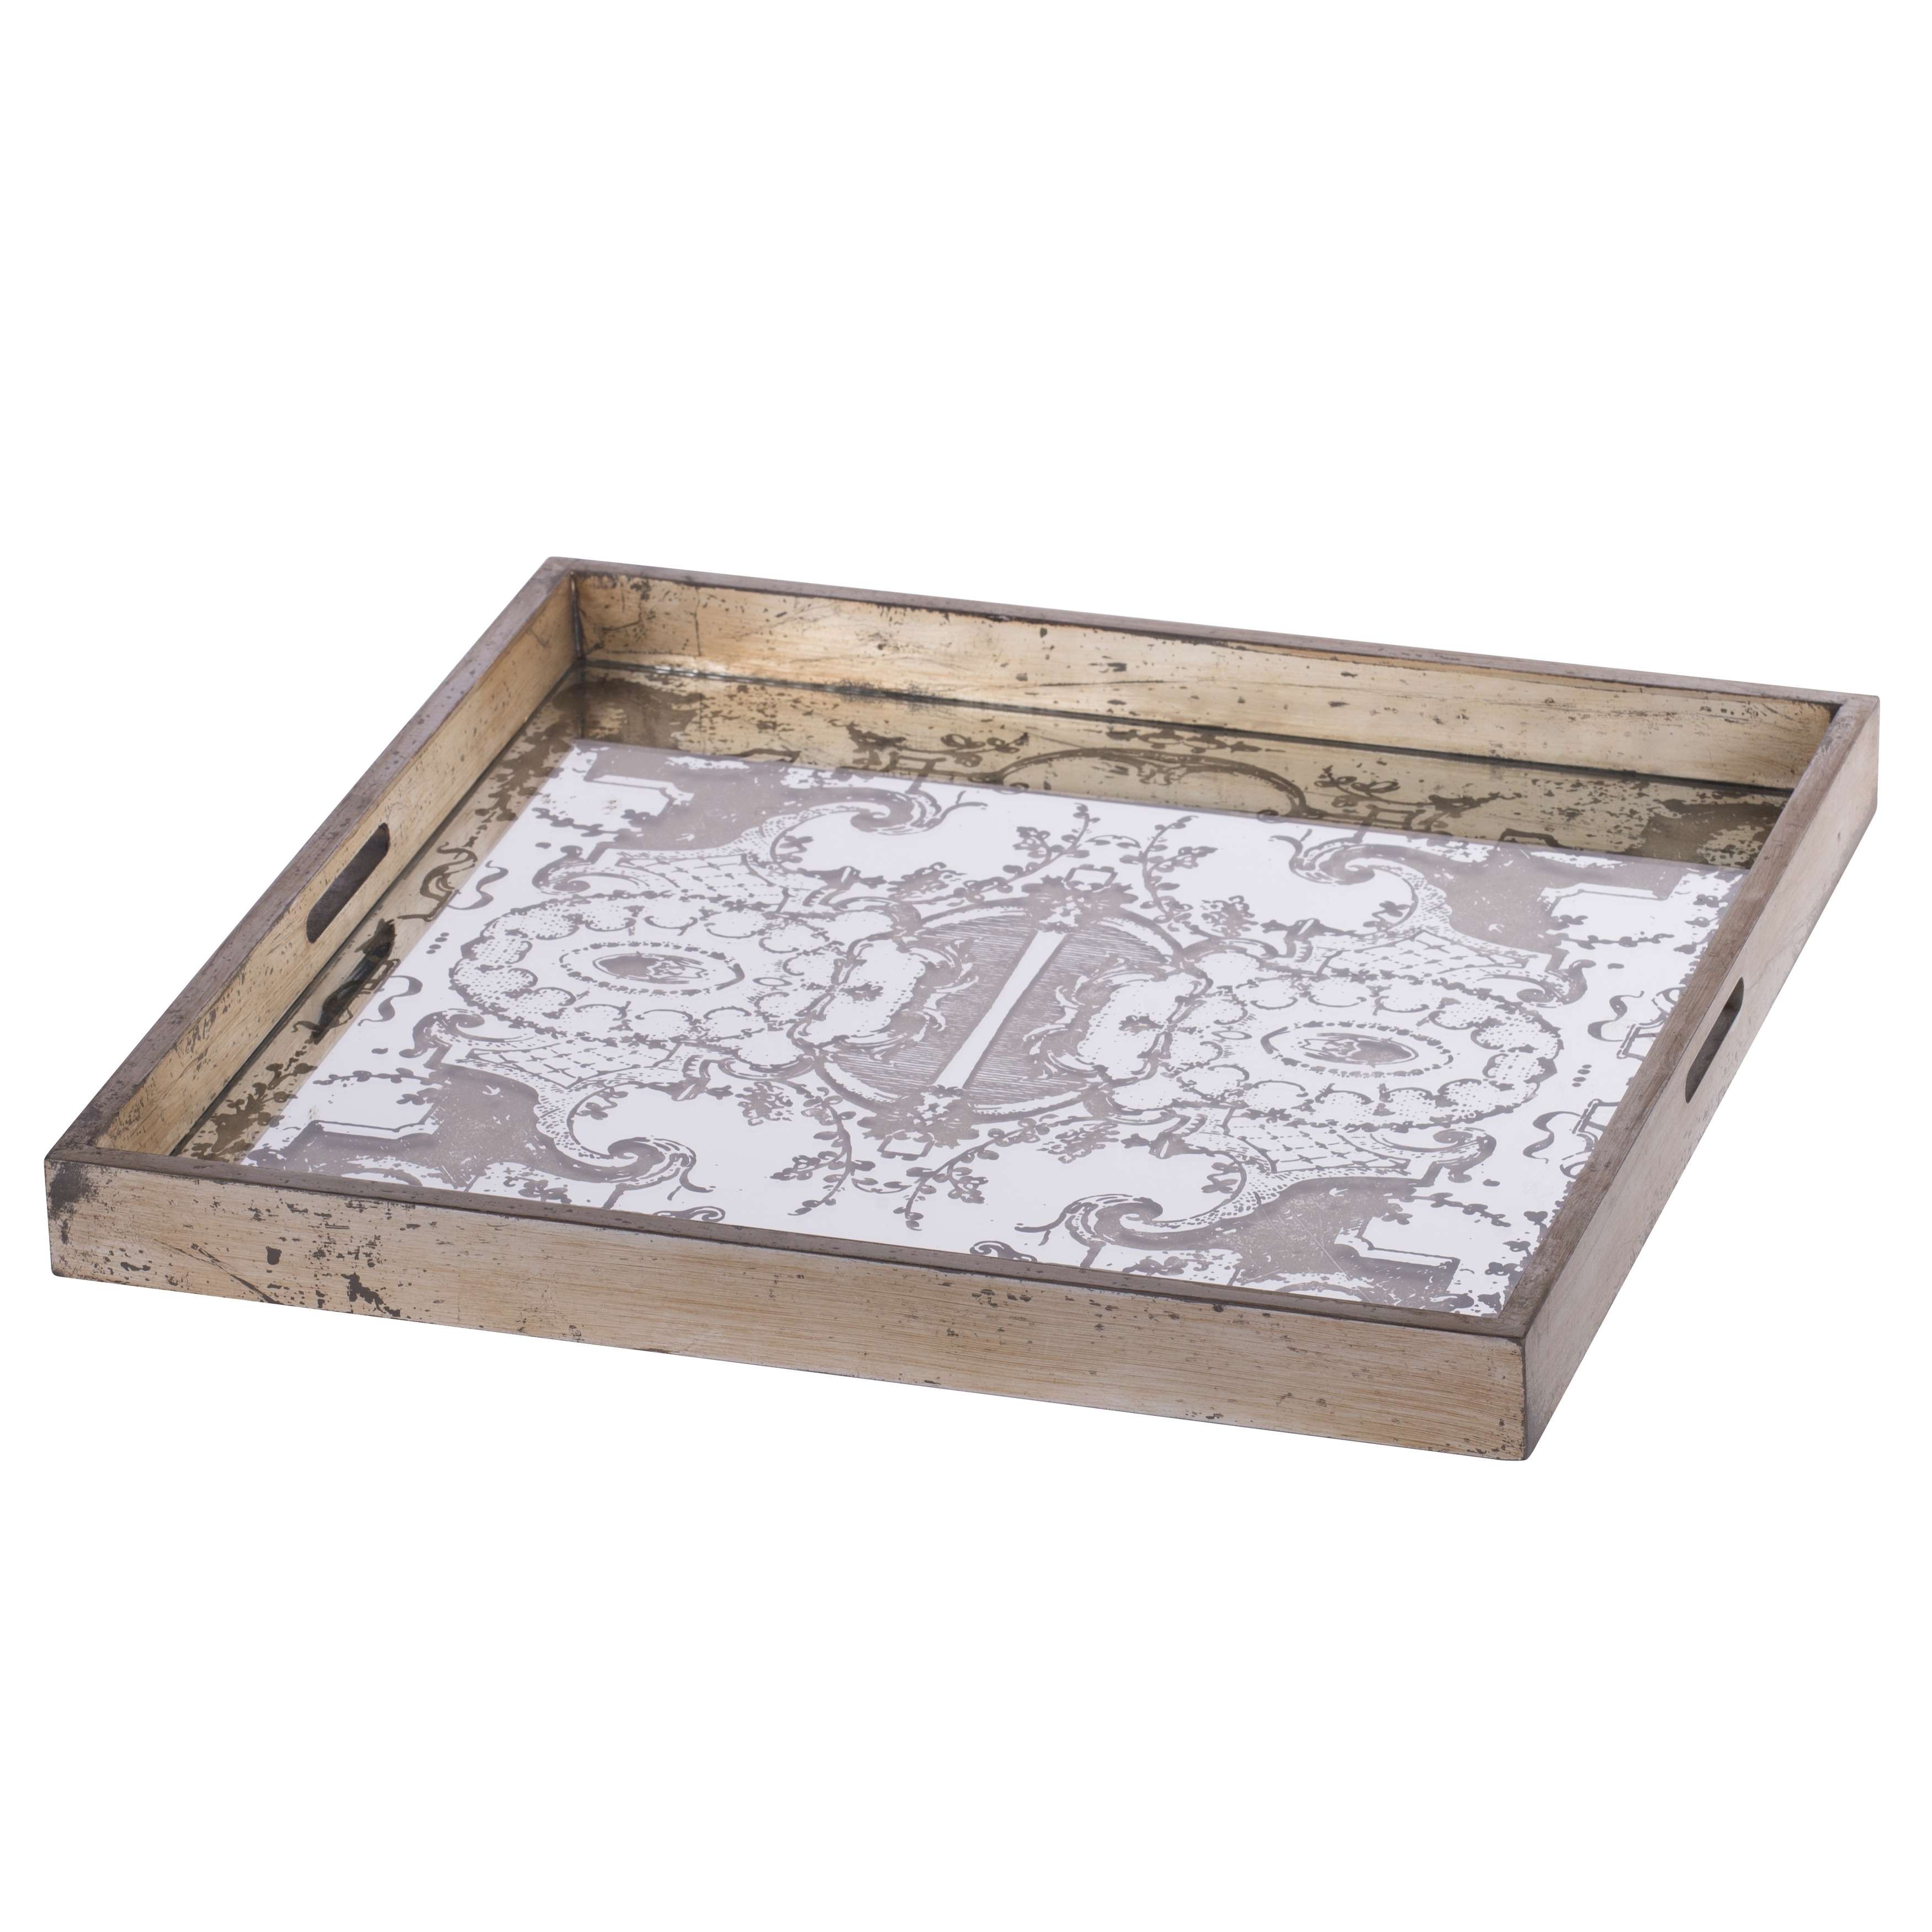 Shop Idony Classic Mirrored Tray 20x20 Inches On Sale